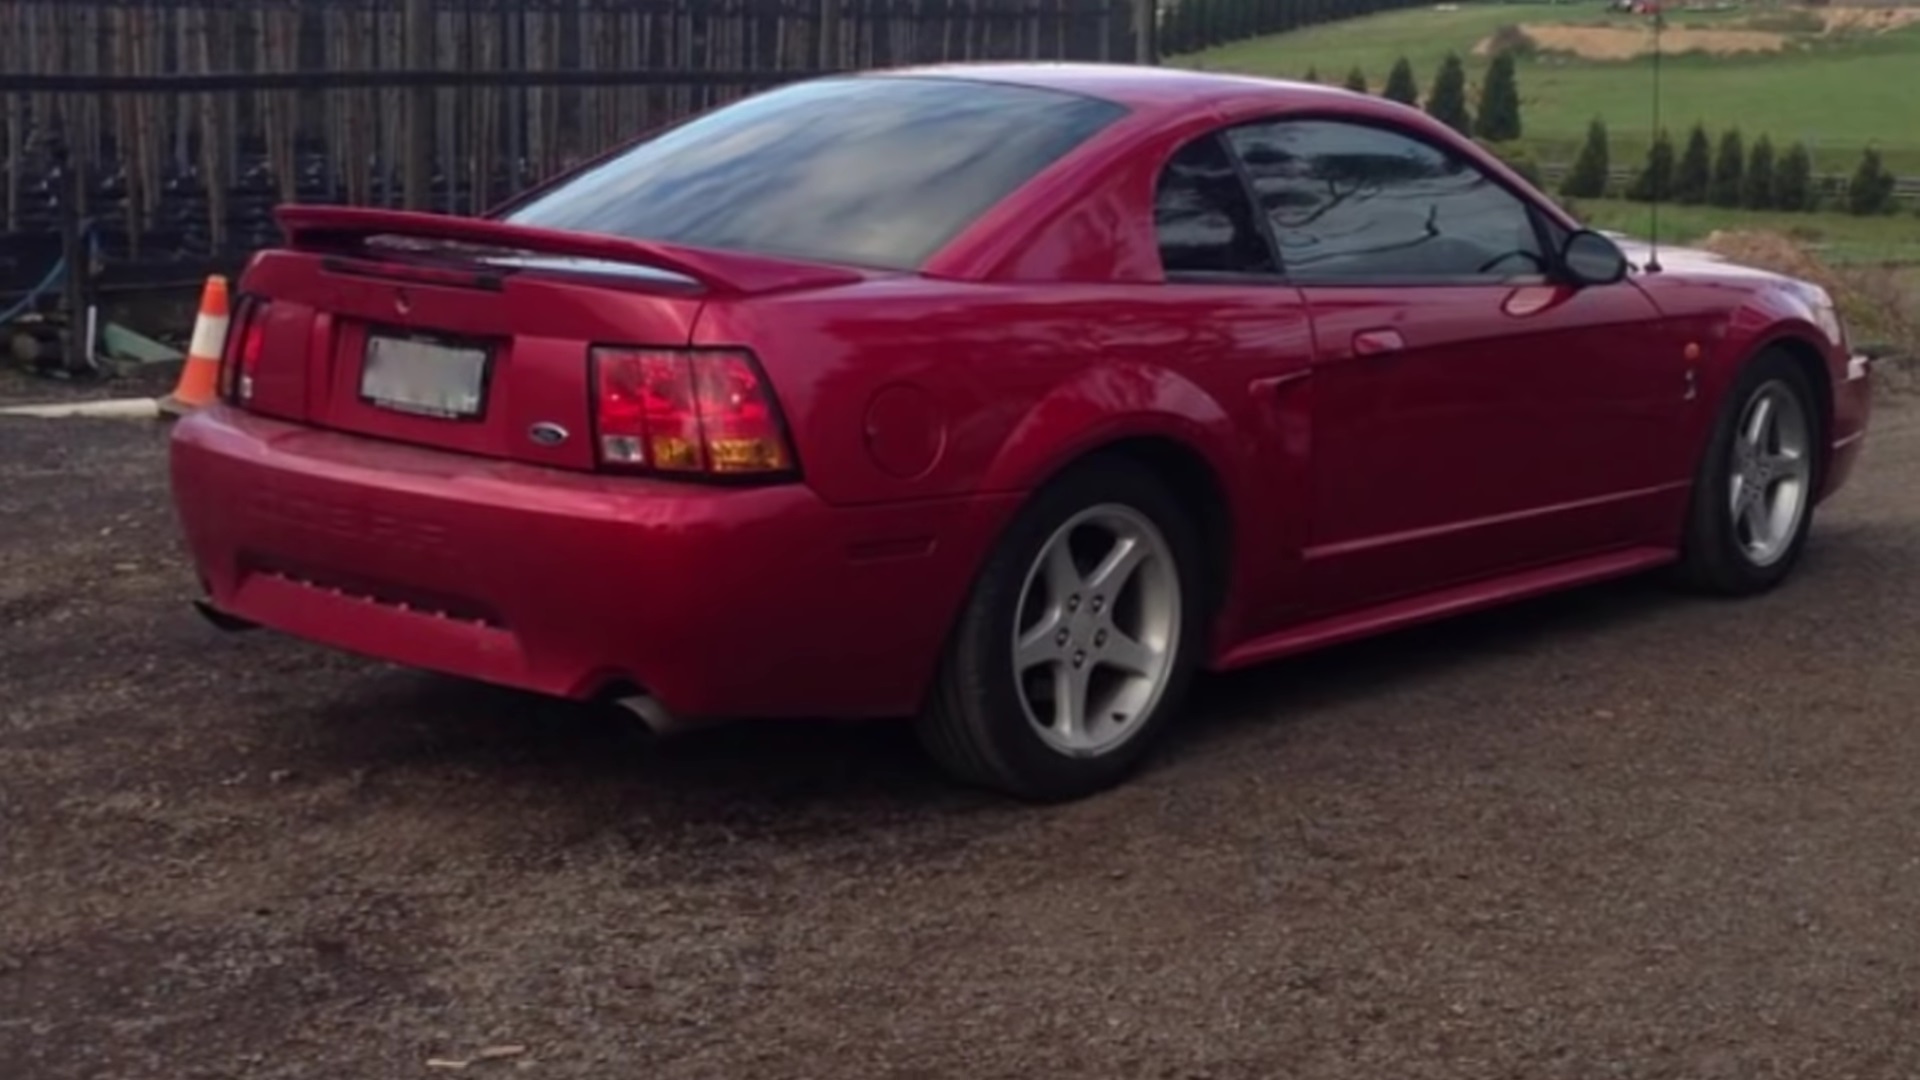 Video: Did Ford Really Make a 2002 Ford Mustang SVT Cobra?